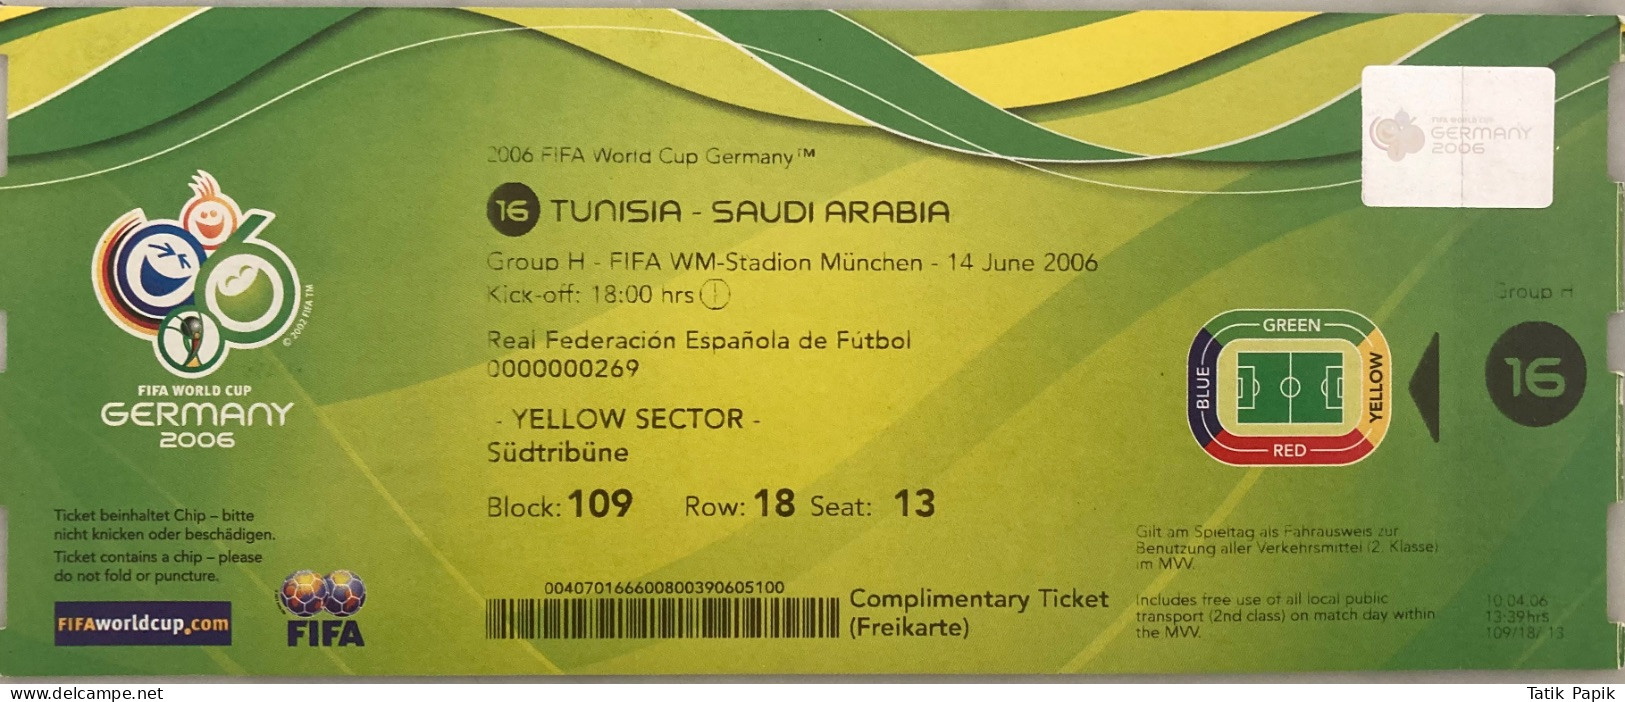 Tickets d'entrée - 2006 Allemagne Fifa World Cup Germany match ticket  Tunisia vs Saudi Arabia